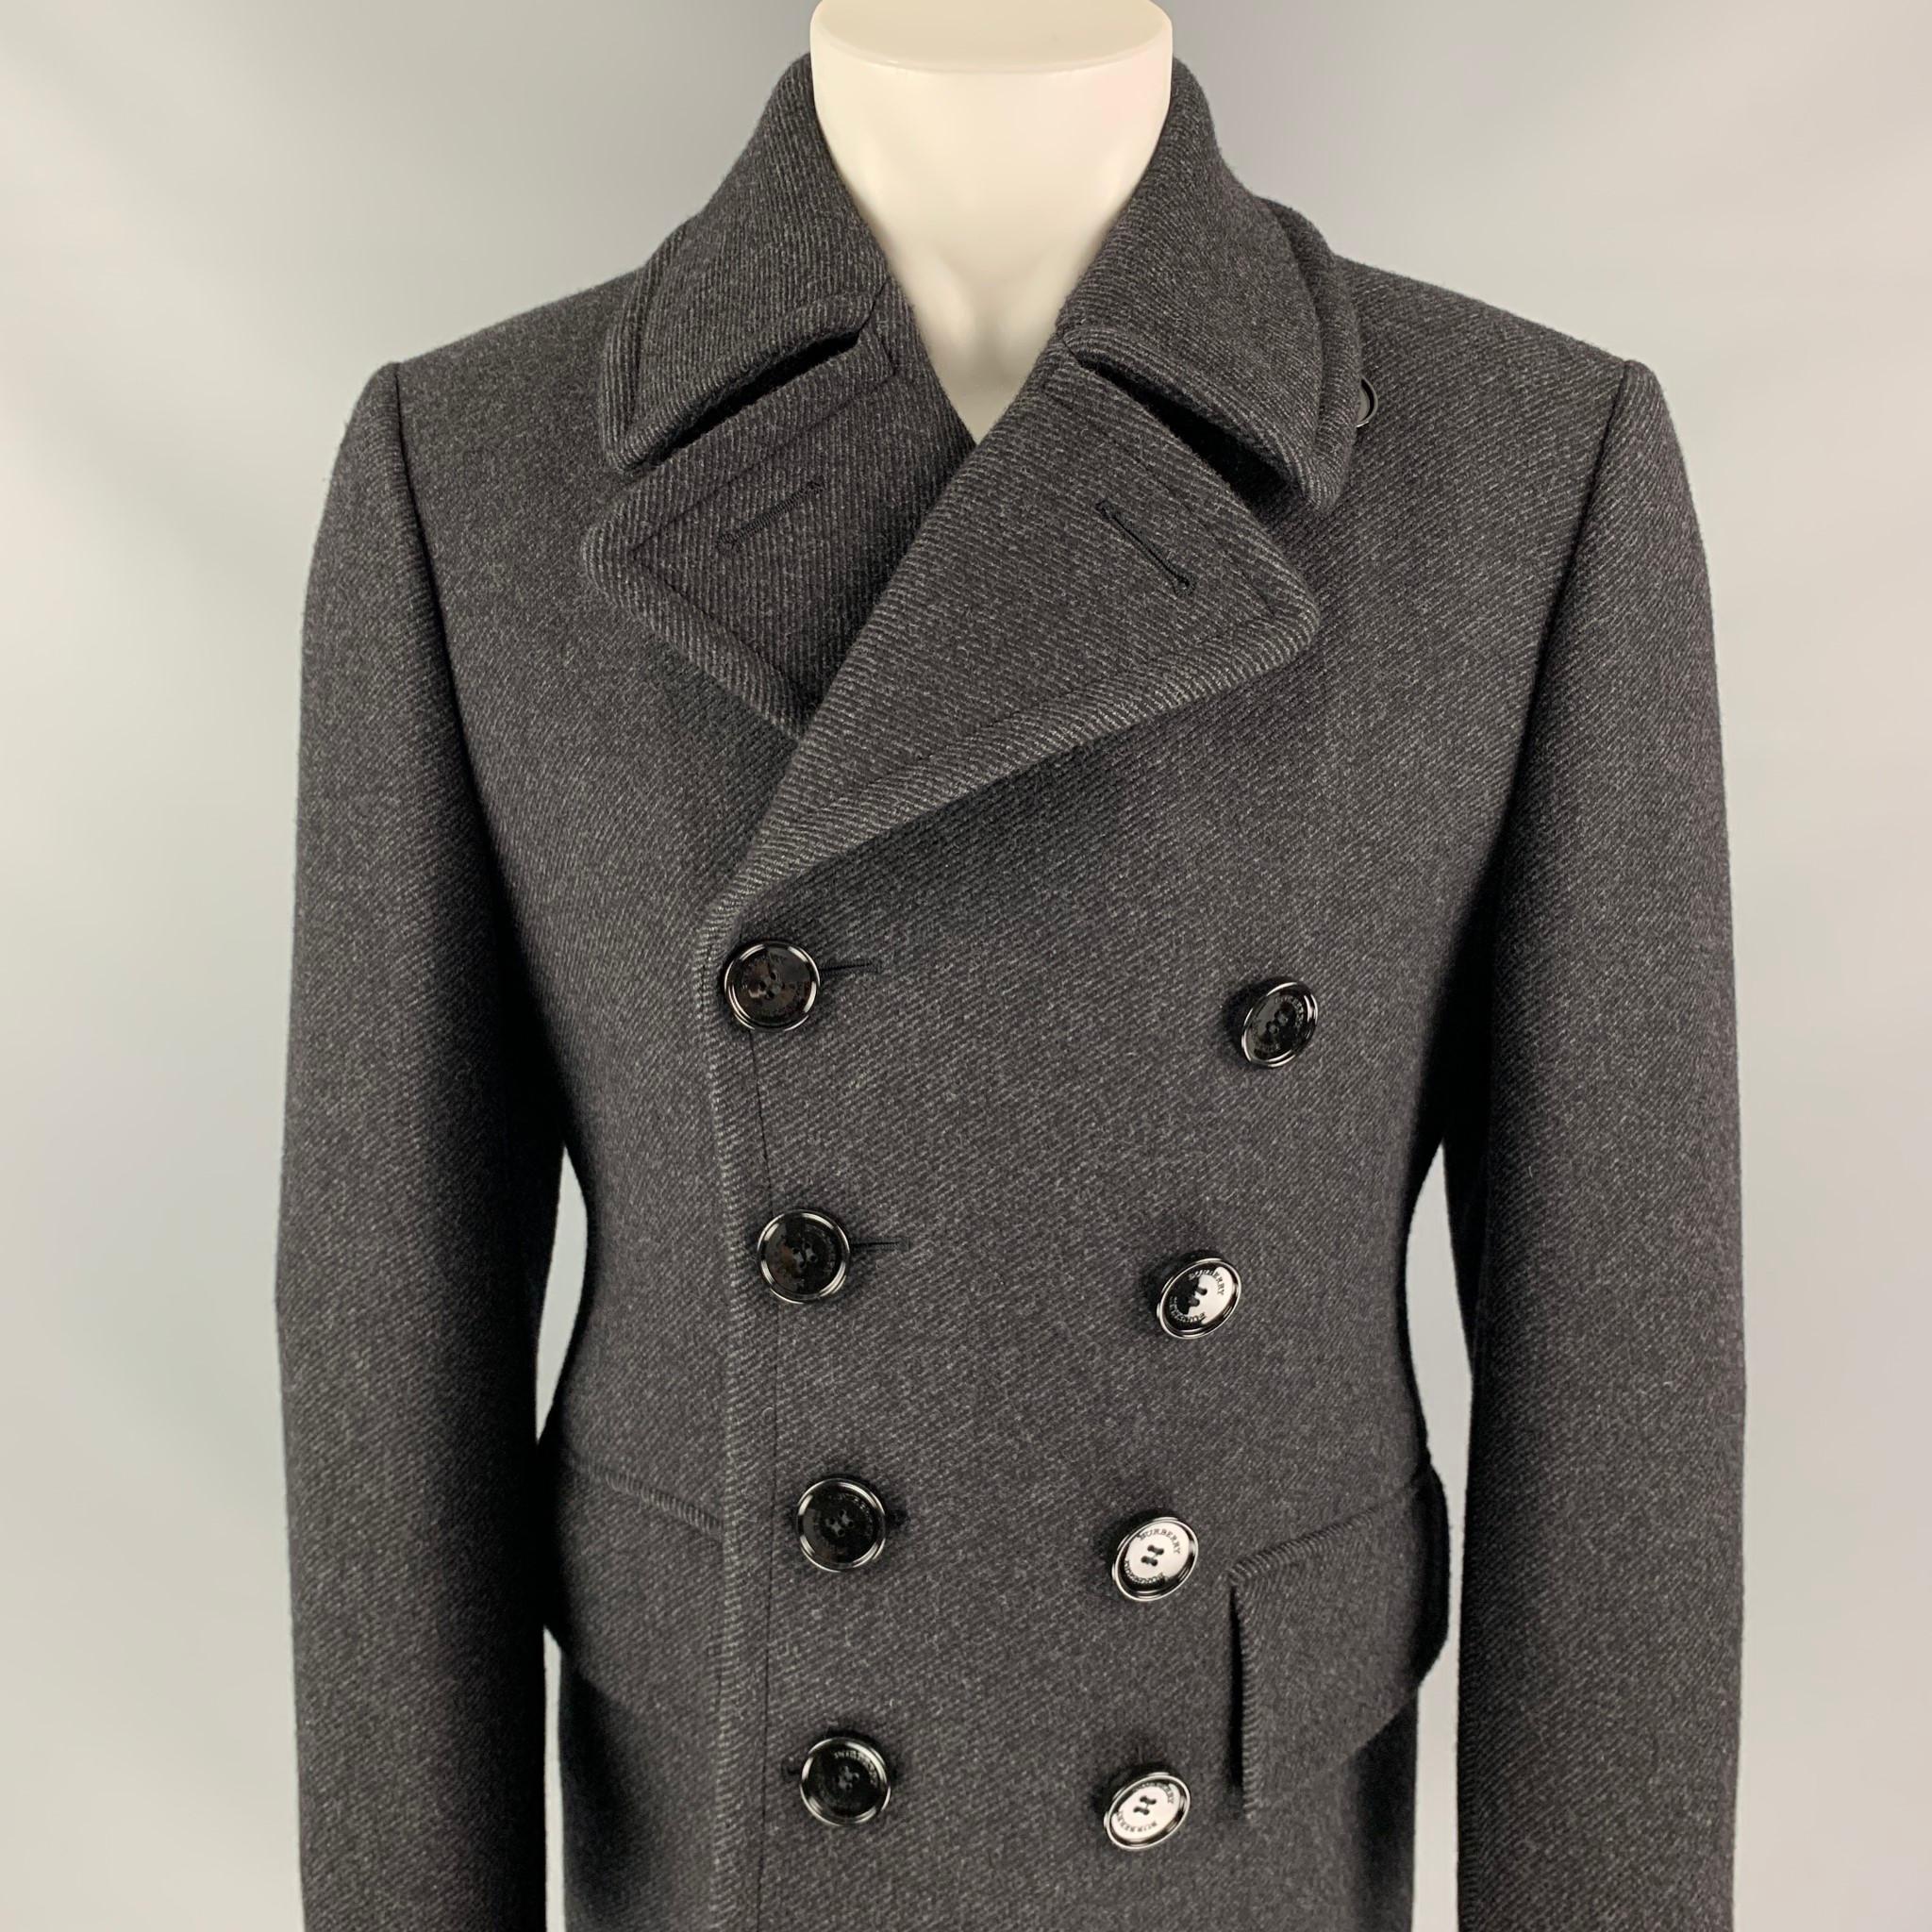 Early Burberry Prorsum by Christopher Bailey Grey Virgin Wool Peacoat Jacket. Double Breasted, Flap Pockets, Collar and Lined.

Excellent Pre-Owned Condition. No visible signs of wear.
Marked: M  US38, IT48

Measurements:

Chest: 41 in.
Shoulder: